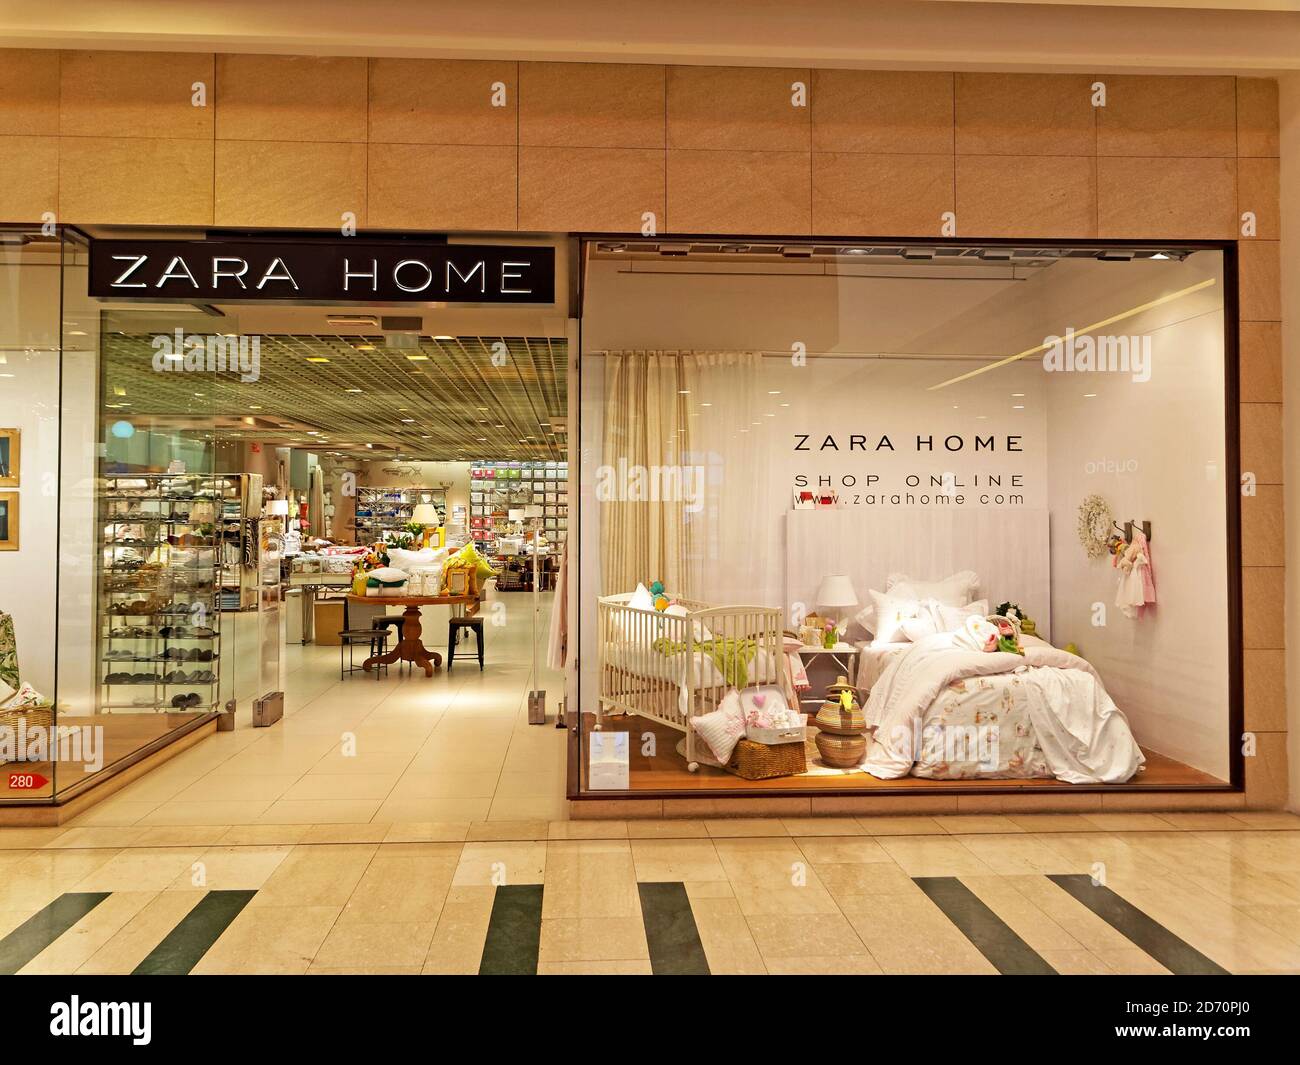 Page 2 - Zara Home Shop High Resolution Stock Photography and Images - Alamy